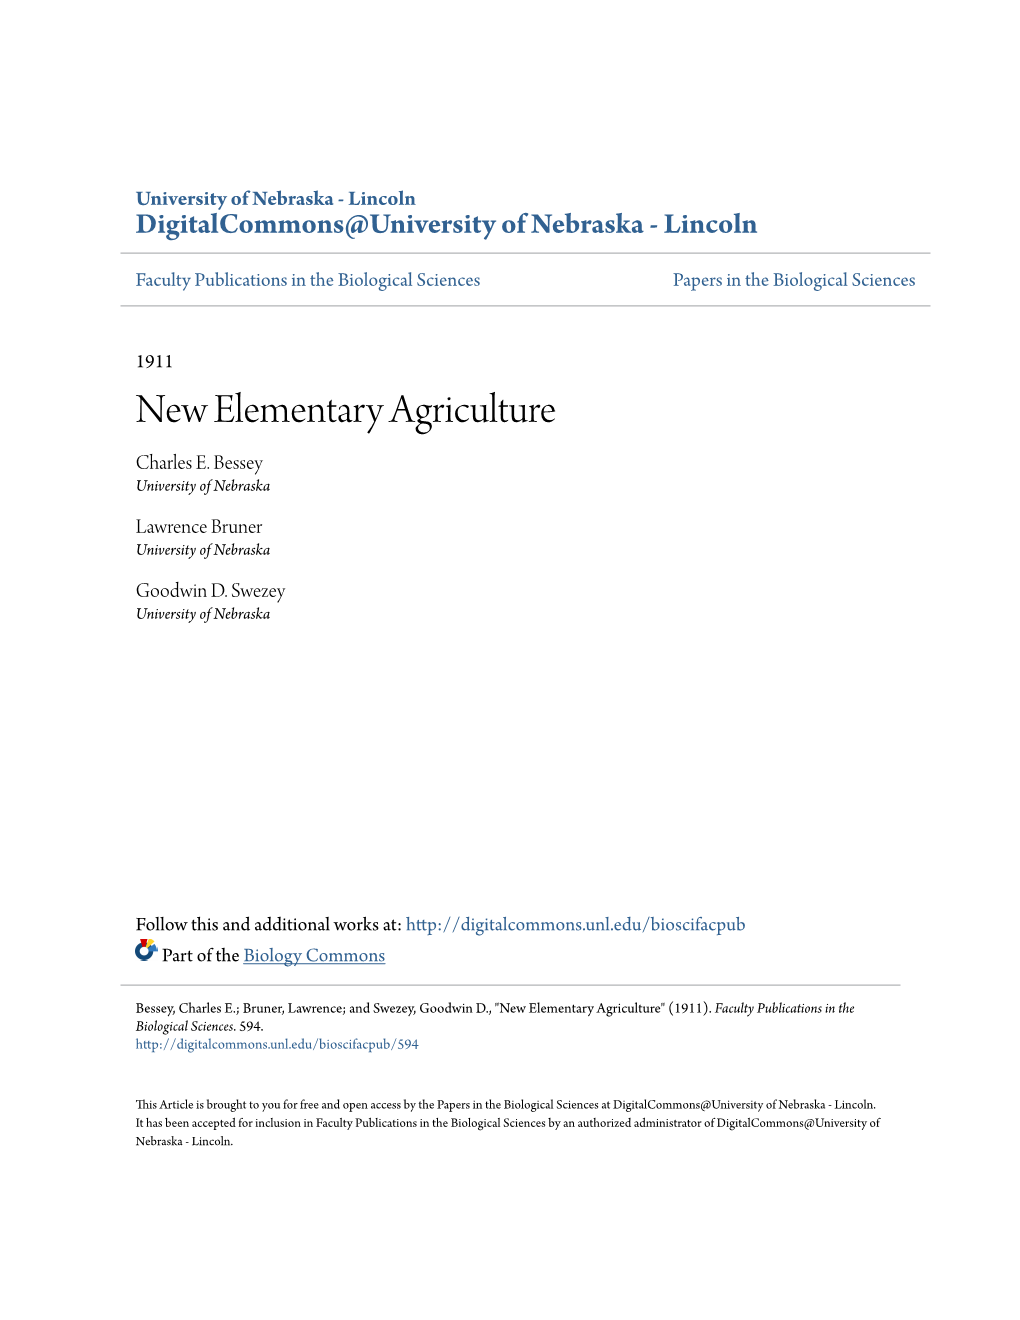 New Elementary Agriculture Charles E